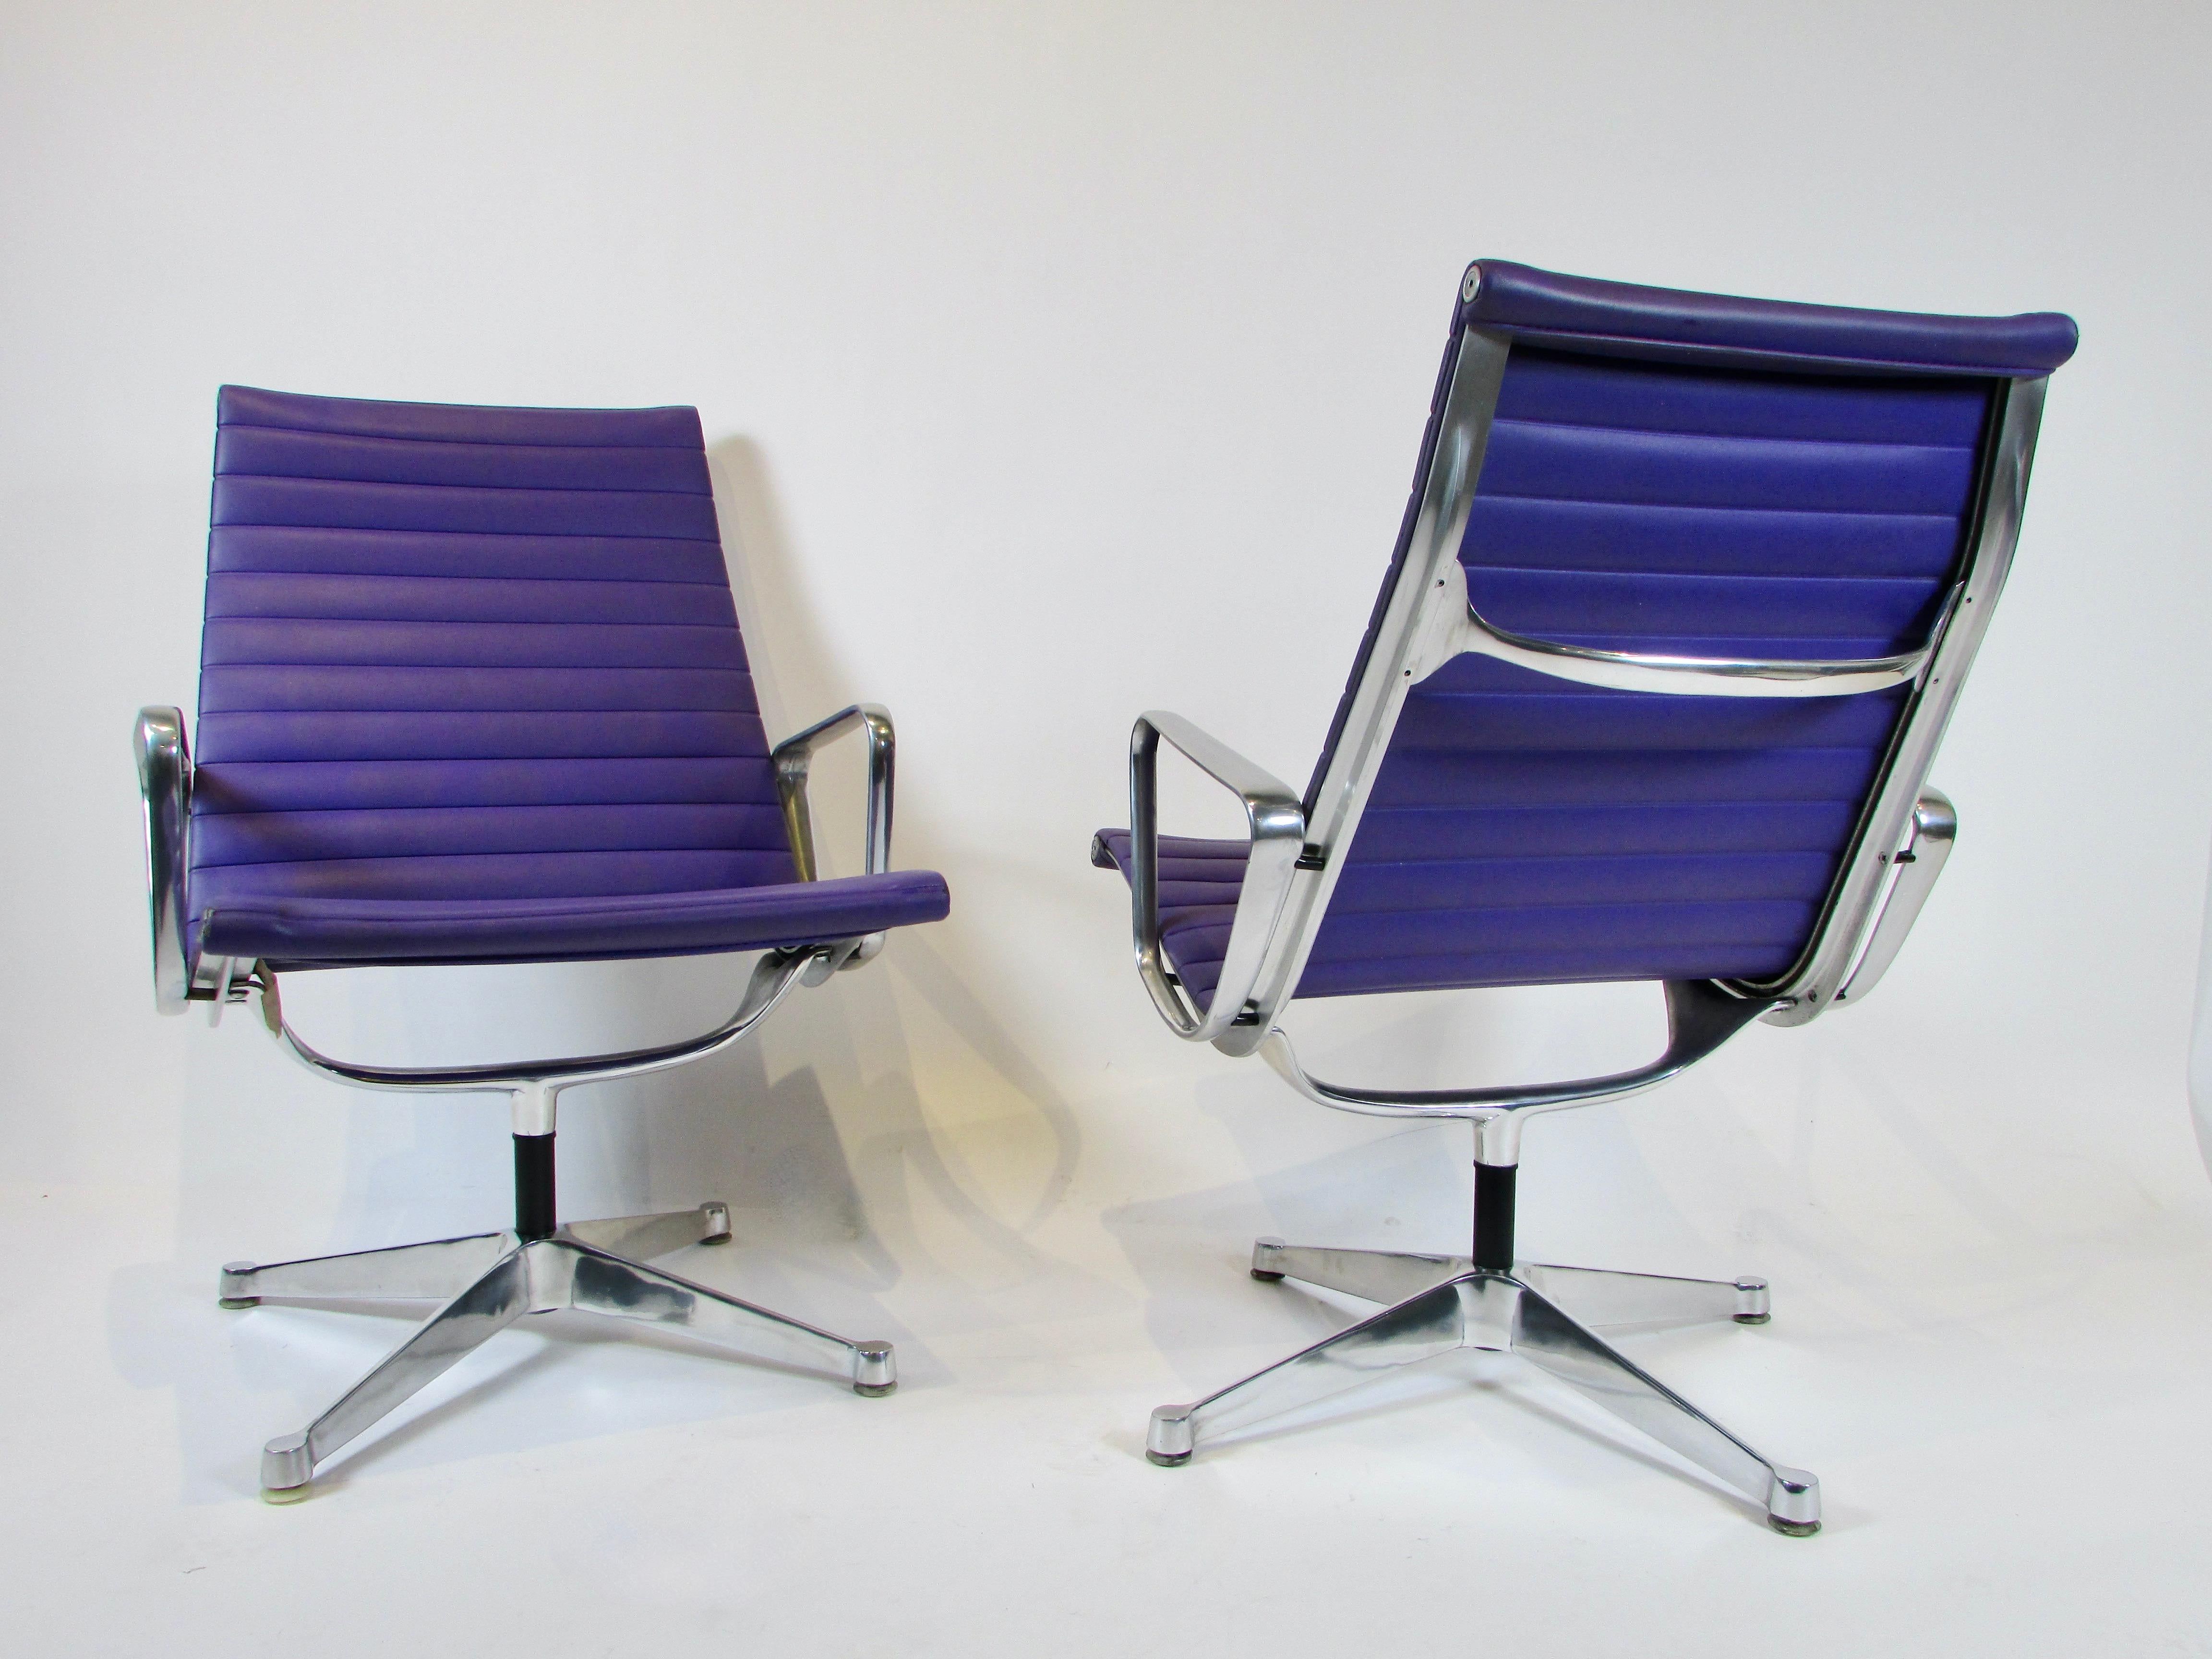 Pair of high back swivel Aluminum group chairs. These are of earlier production with the flat aluminum base. Original purple naugahyde covers are in very good to excellent condition. Ever so slight wear shows at leading edge corners. 
Part of the